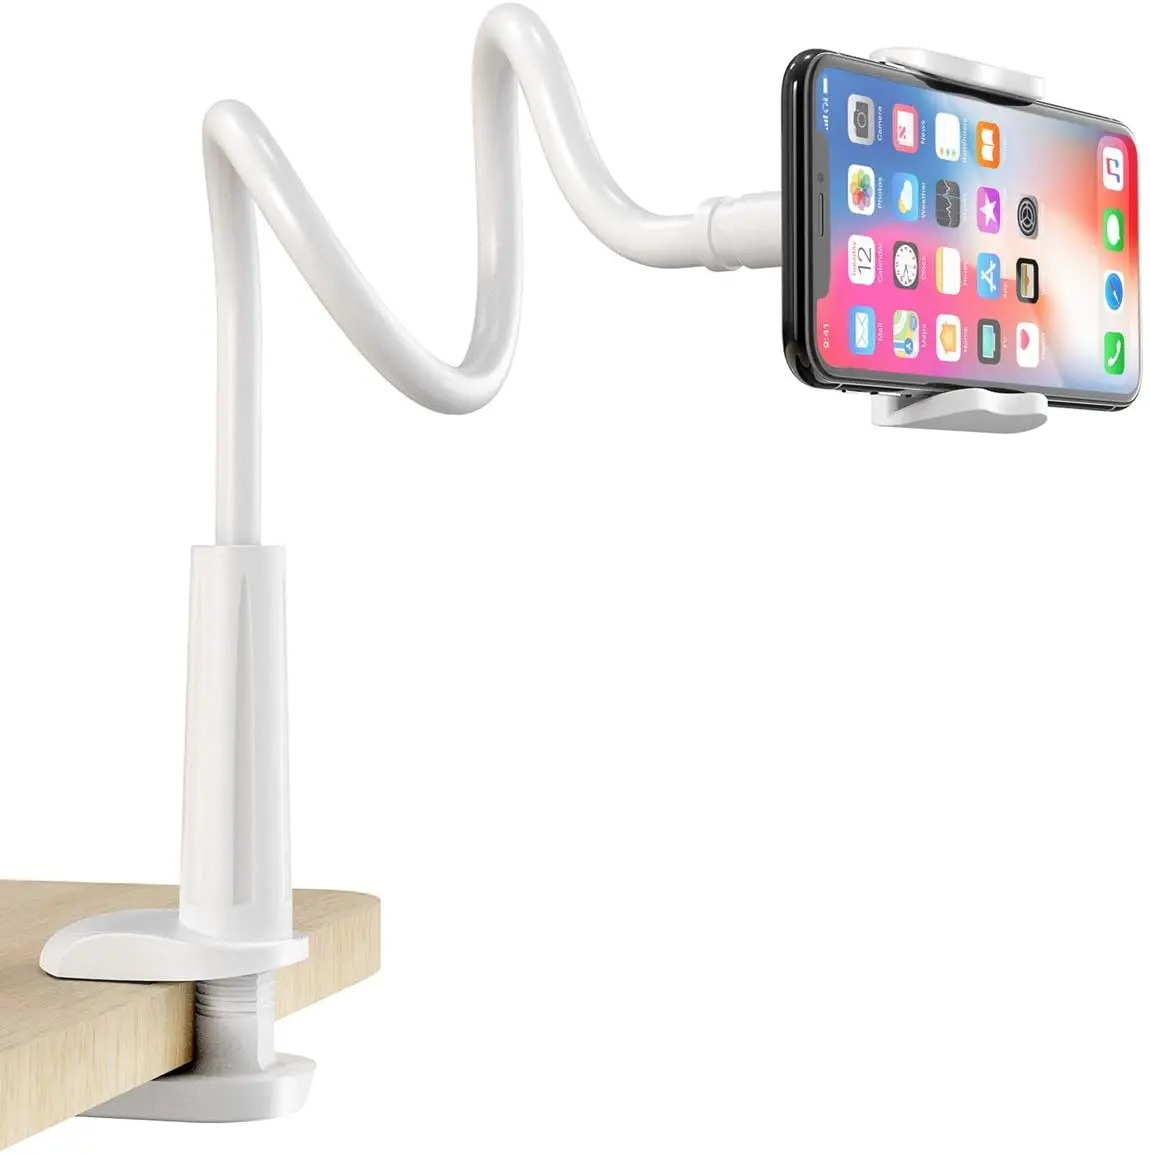 

Gooseneck Cell Phone Holder Universal 360 Flexible Phone Stand Lazy Bracket Mount Long Arms Clamp for Phone for ipad, Black,white